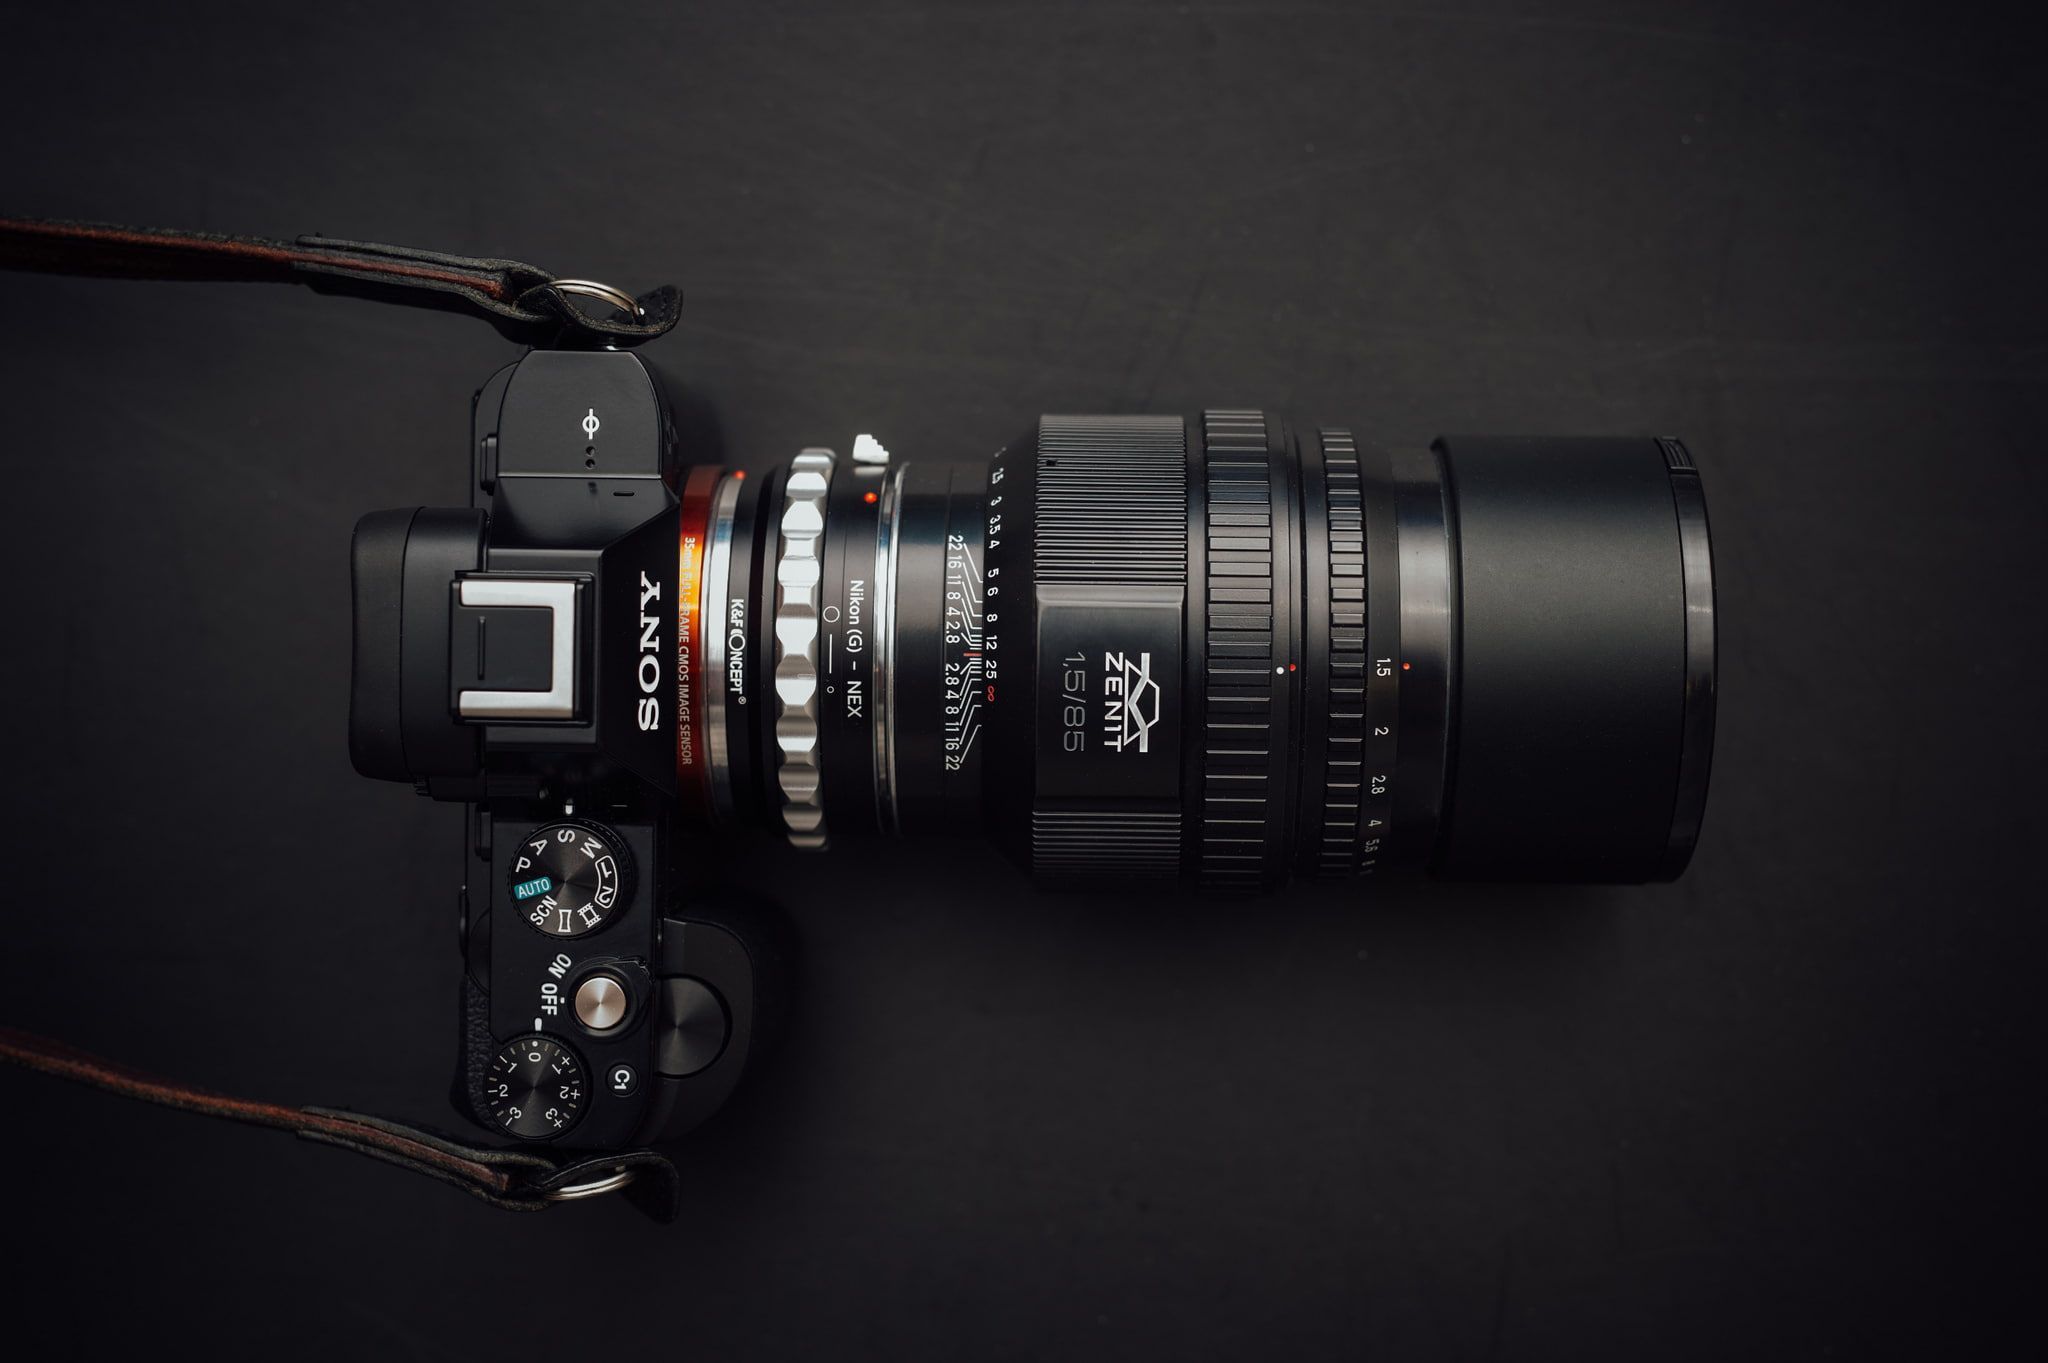 background #camera Sony A7 P #wallpaper #hdwallpaper #desktop. Sony dslr camera, Camera, Nikon camera lenses